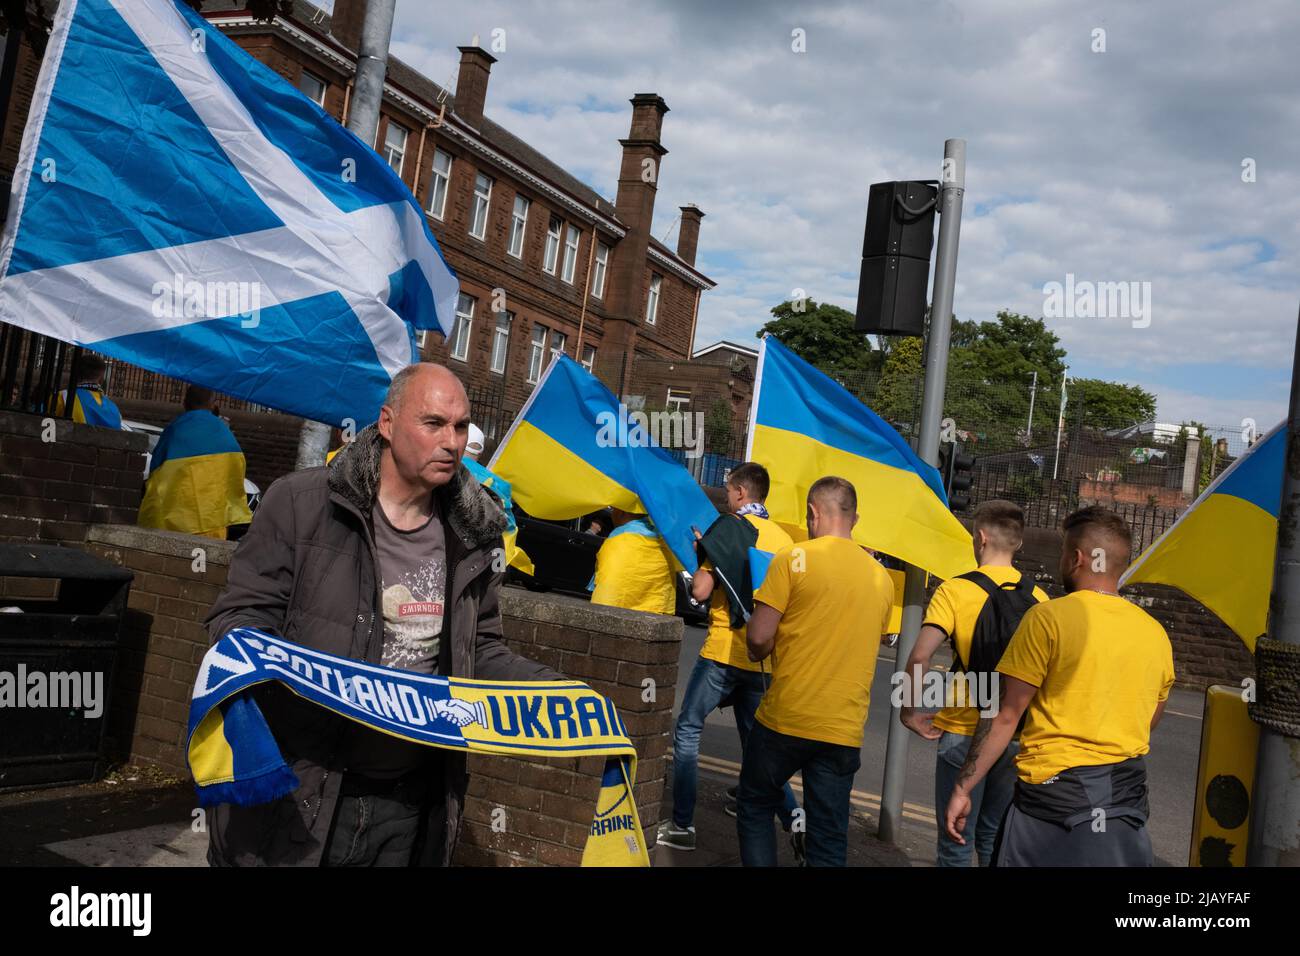 Glasgow, Scotland, 1st June 2022. Scotland and Ukraine football fans outside Hampden Park Stadium ahead of tonightÕs UEFA World Cup play-off game, in Glasgow, Scotland, 1 June 2022. Photo credit: Jeremy Sutton-Hibbert/Alamy Live News. Stock Photo